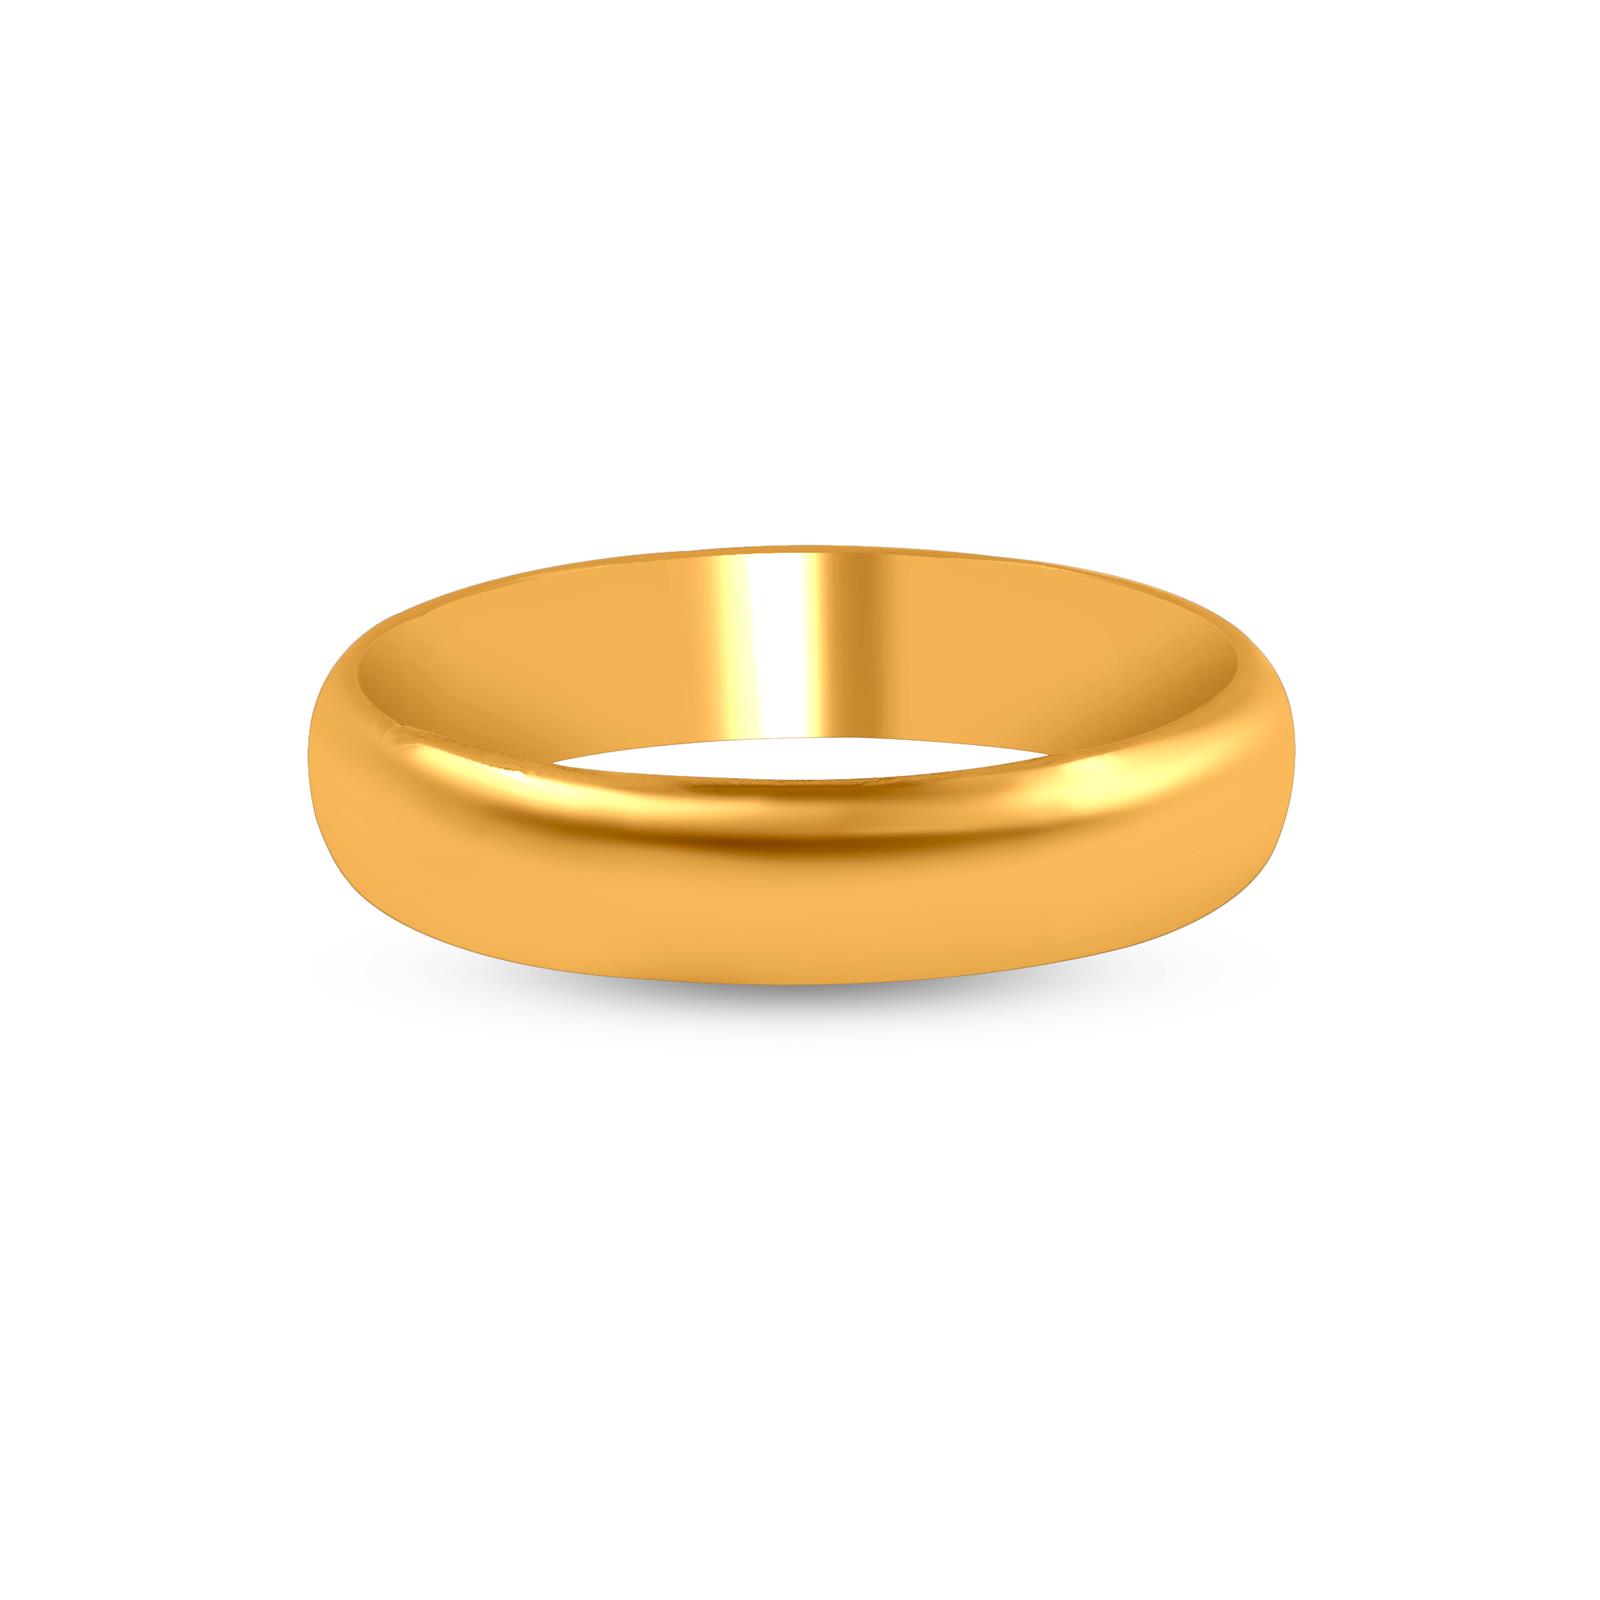 Buy Handmade Rustic Gold Wedding Band Brushed Matte Finish 22ct 22kt  Recycled Solid Gold Ring 3mm Wide Online in India - Etsy